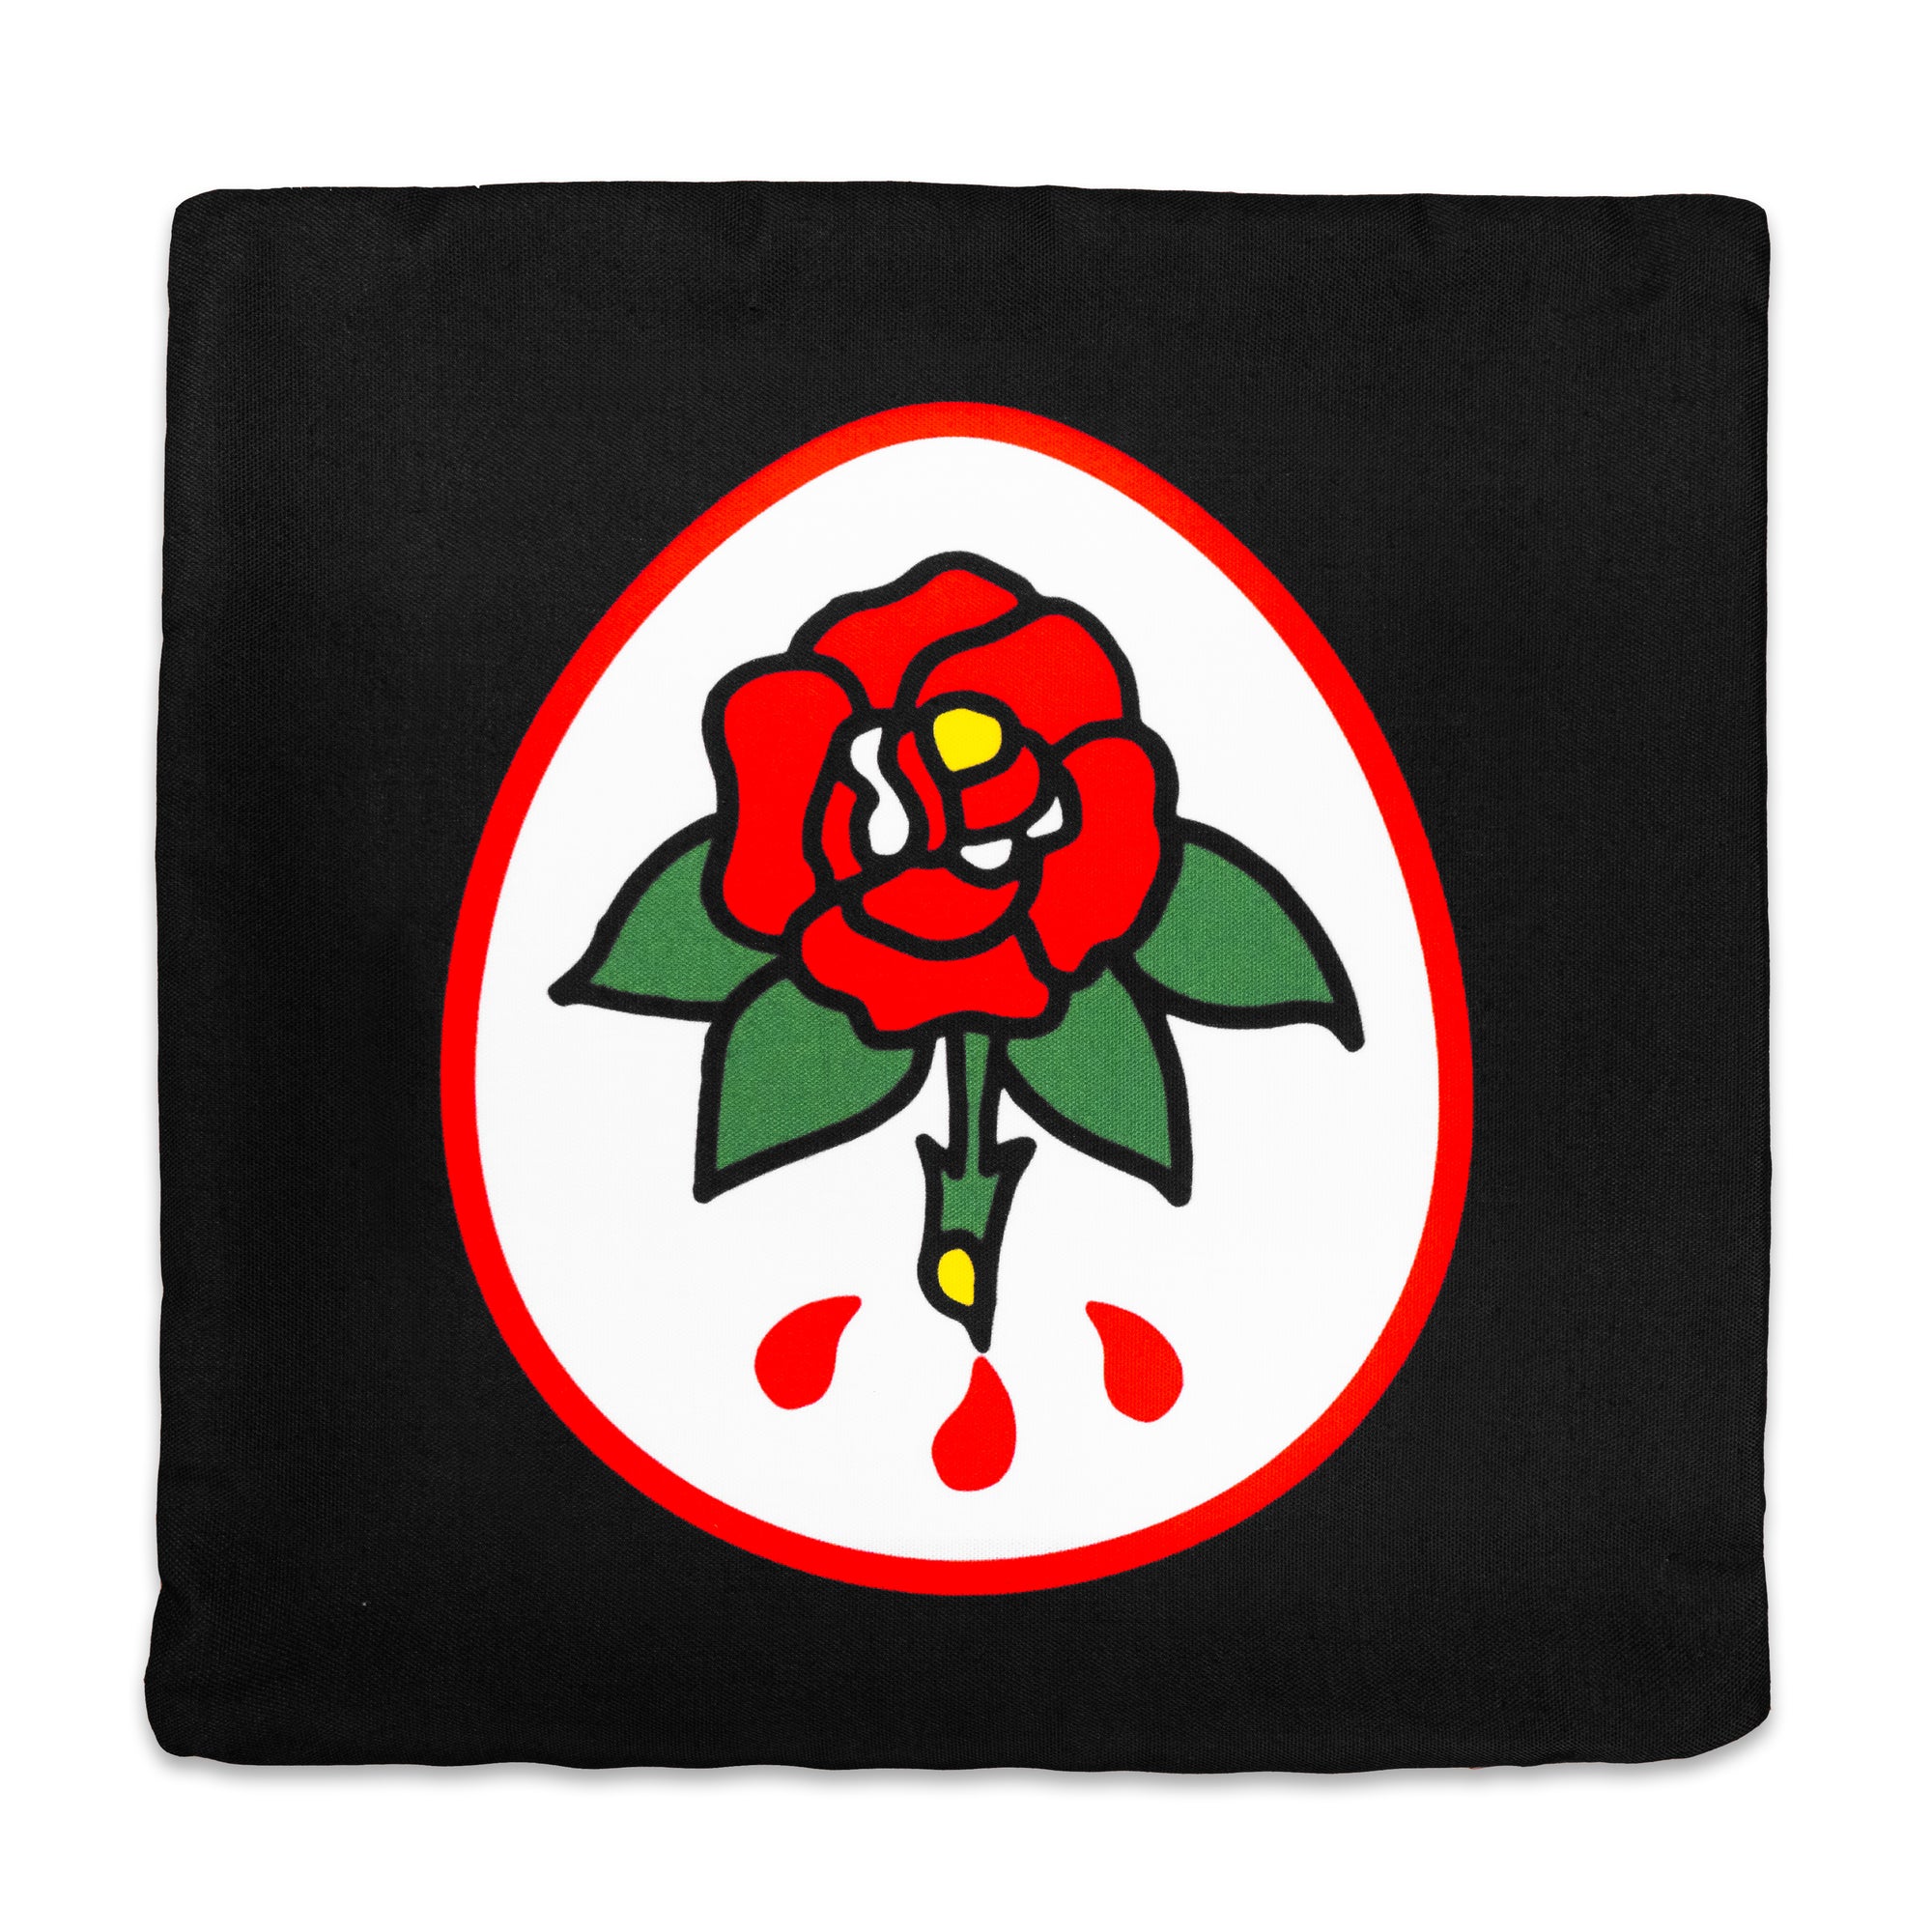 The "Sword & Rose" Pillowcase by No Fun®. Pillowcase is black, with a double sided design. One side has a red and white oval, with a cartoon rose in the center. The rose is red, and has 4 green leaves and a green stem. There are 3 red drips near the bottom of the stem.